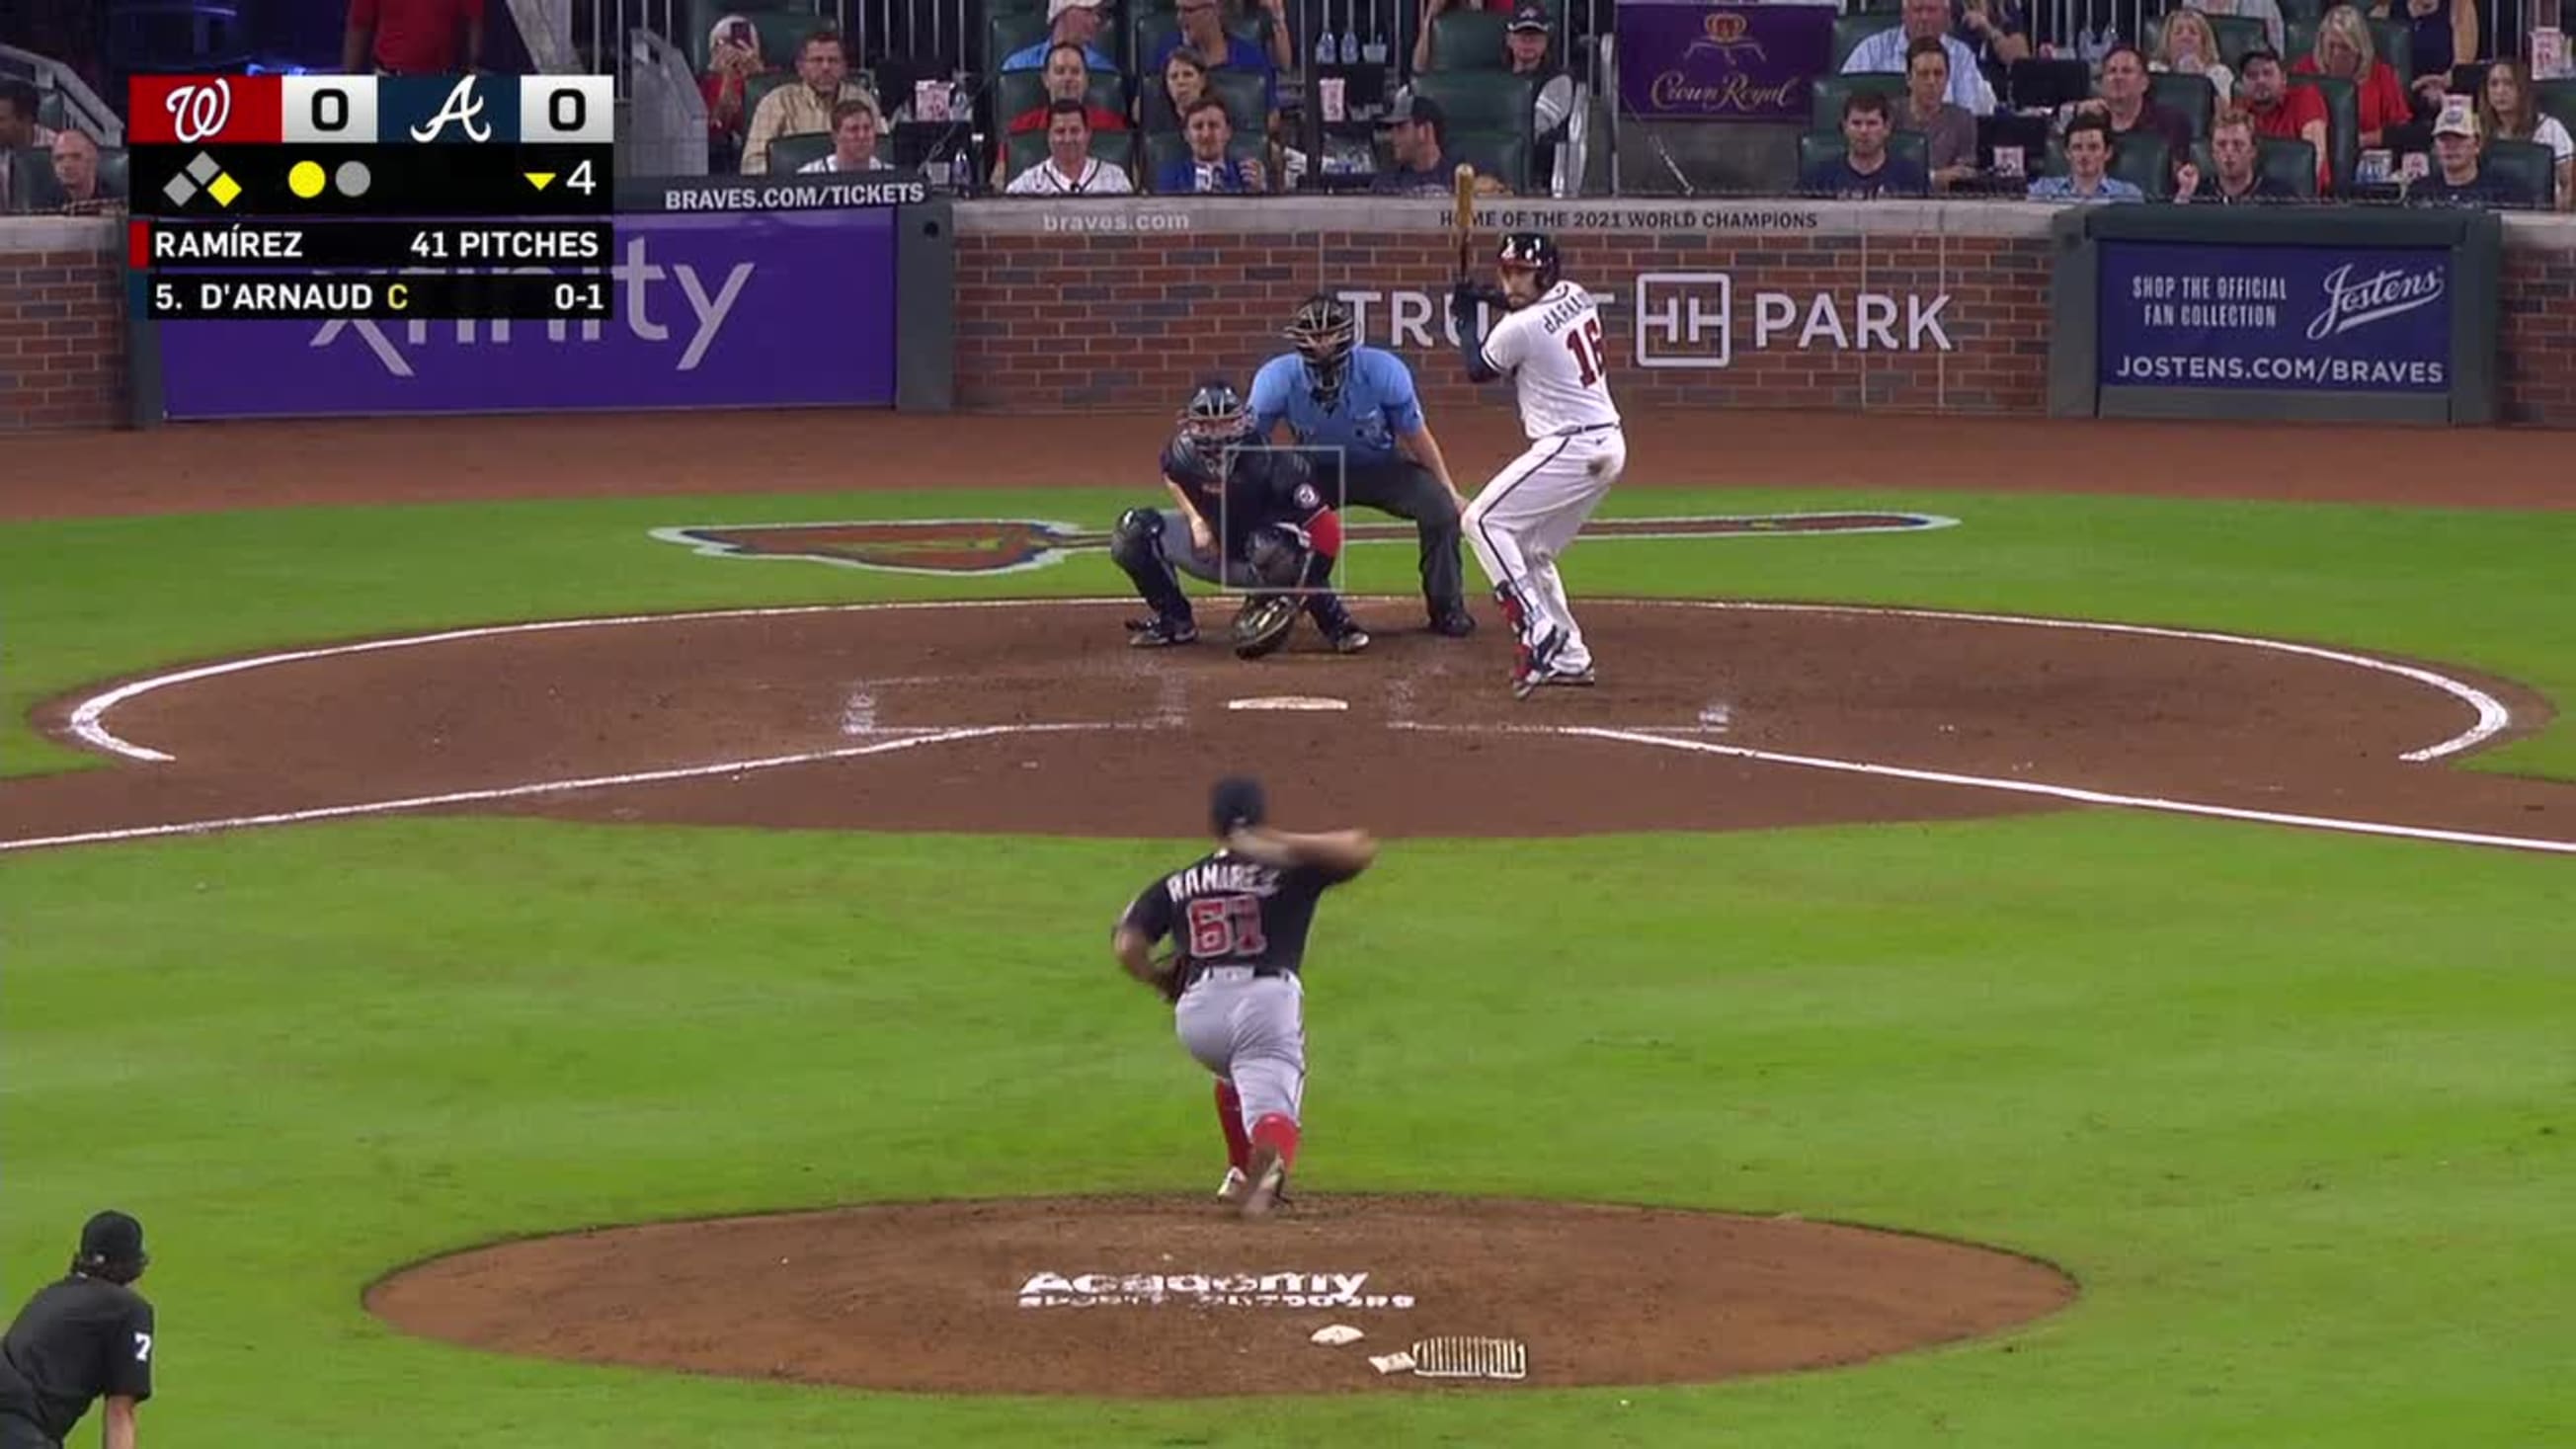 WATCH: Travis d'Arnaud smacks a two-out hit to add to the Braves lead -  Sports Illustrated Atlanta Braves News, Analysis and More